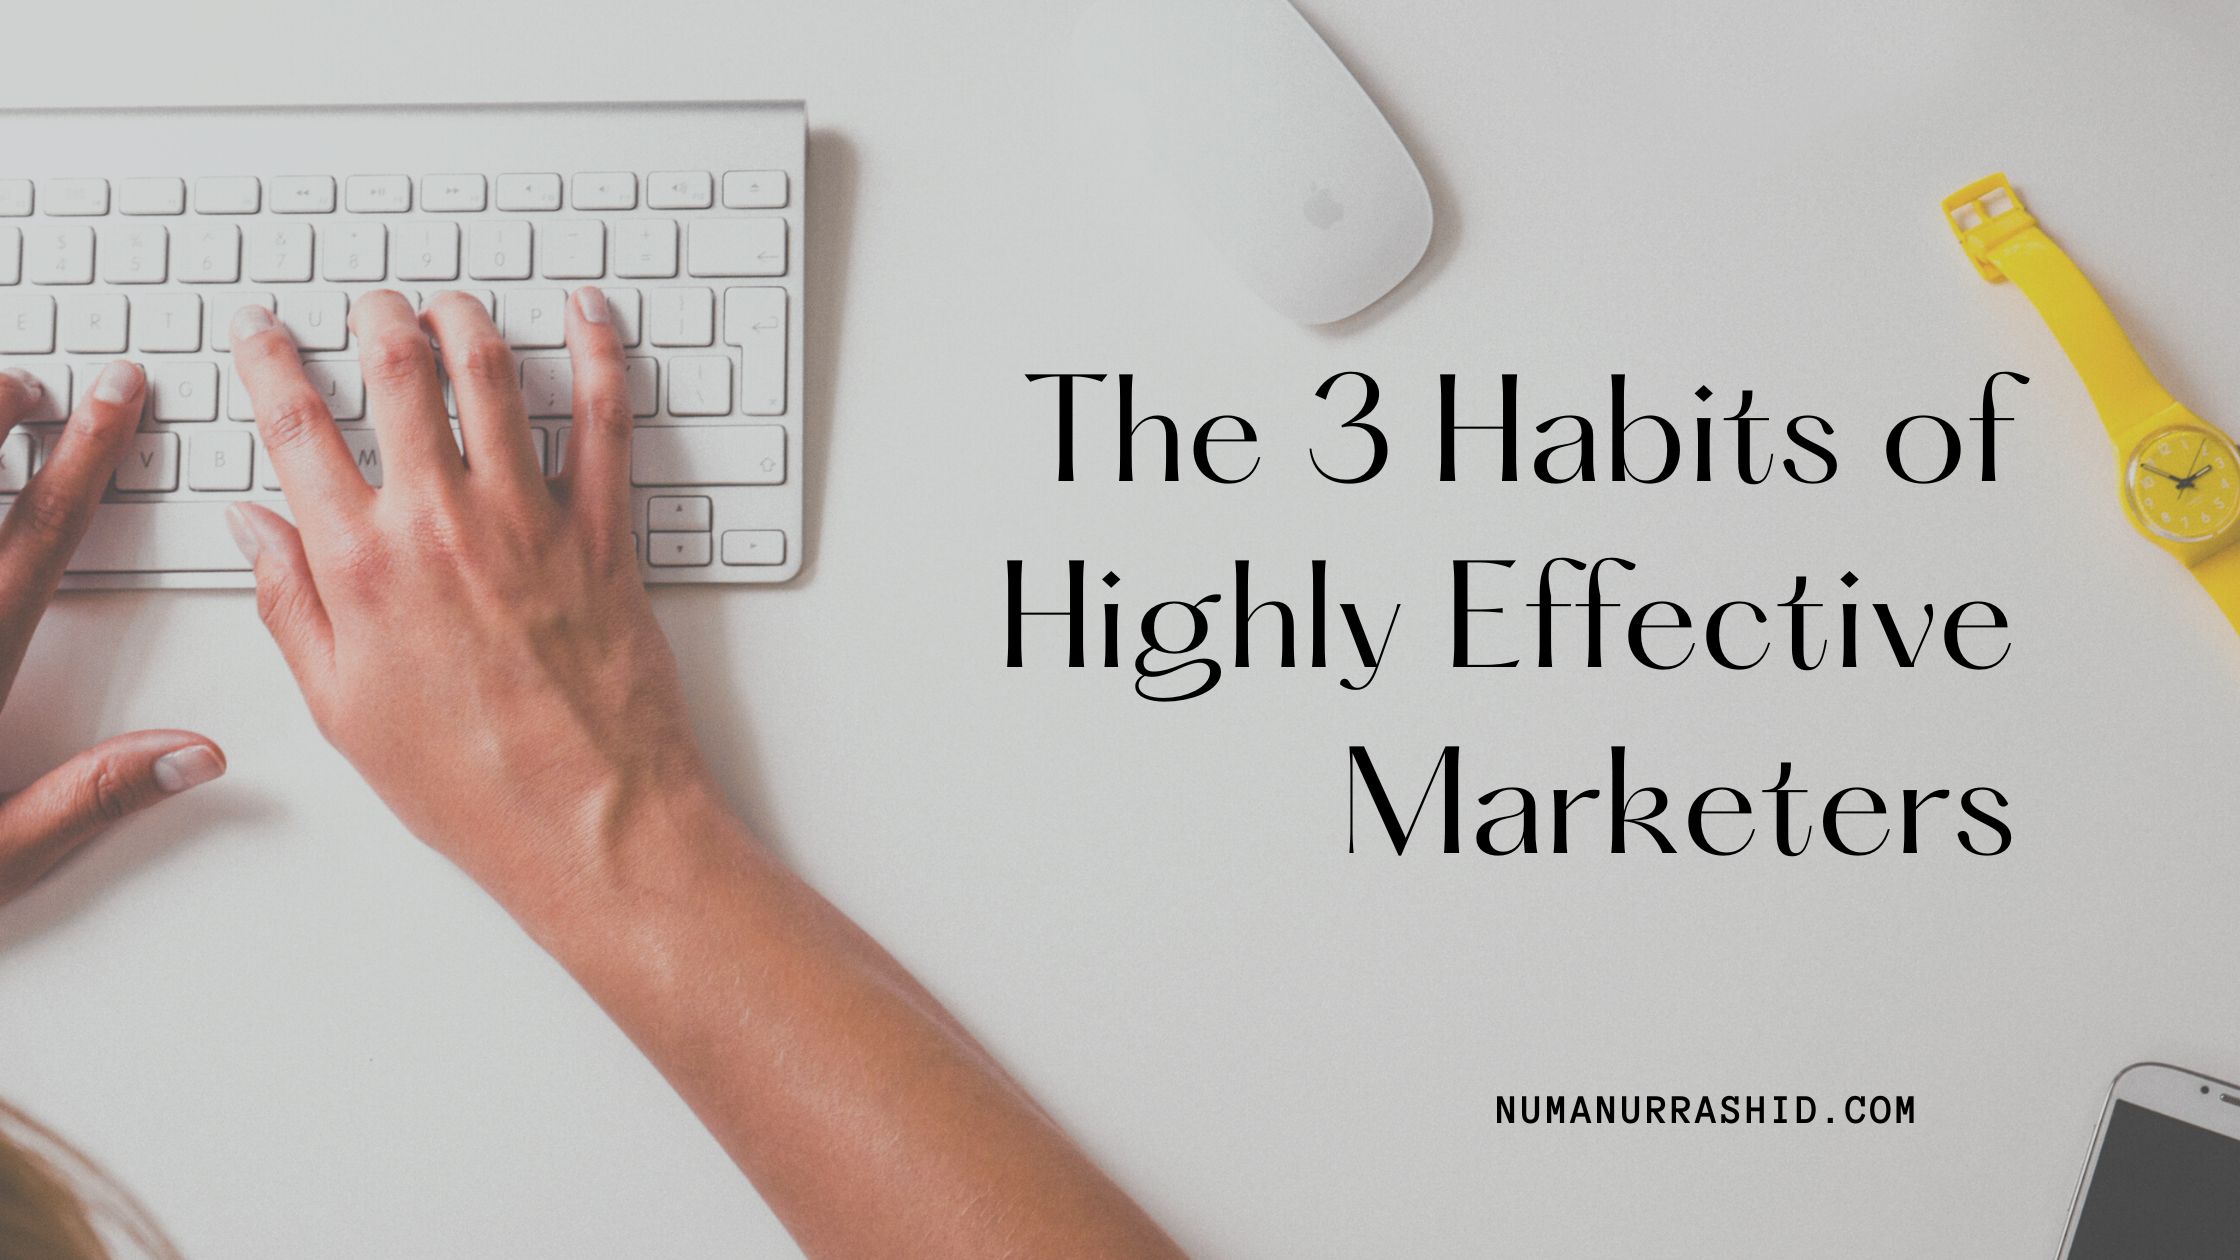 The 3 Habits of Highly Effective Marketers